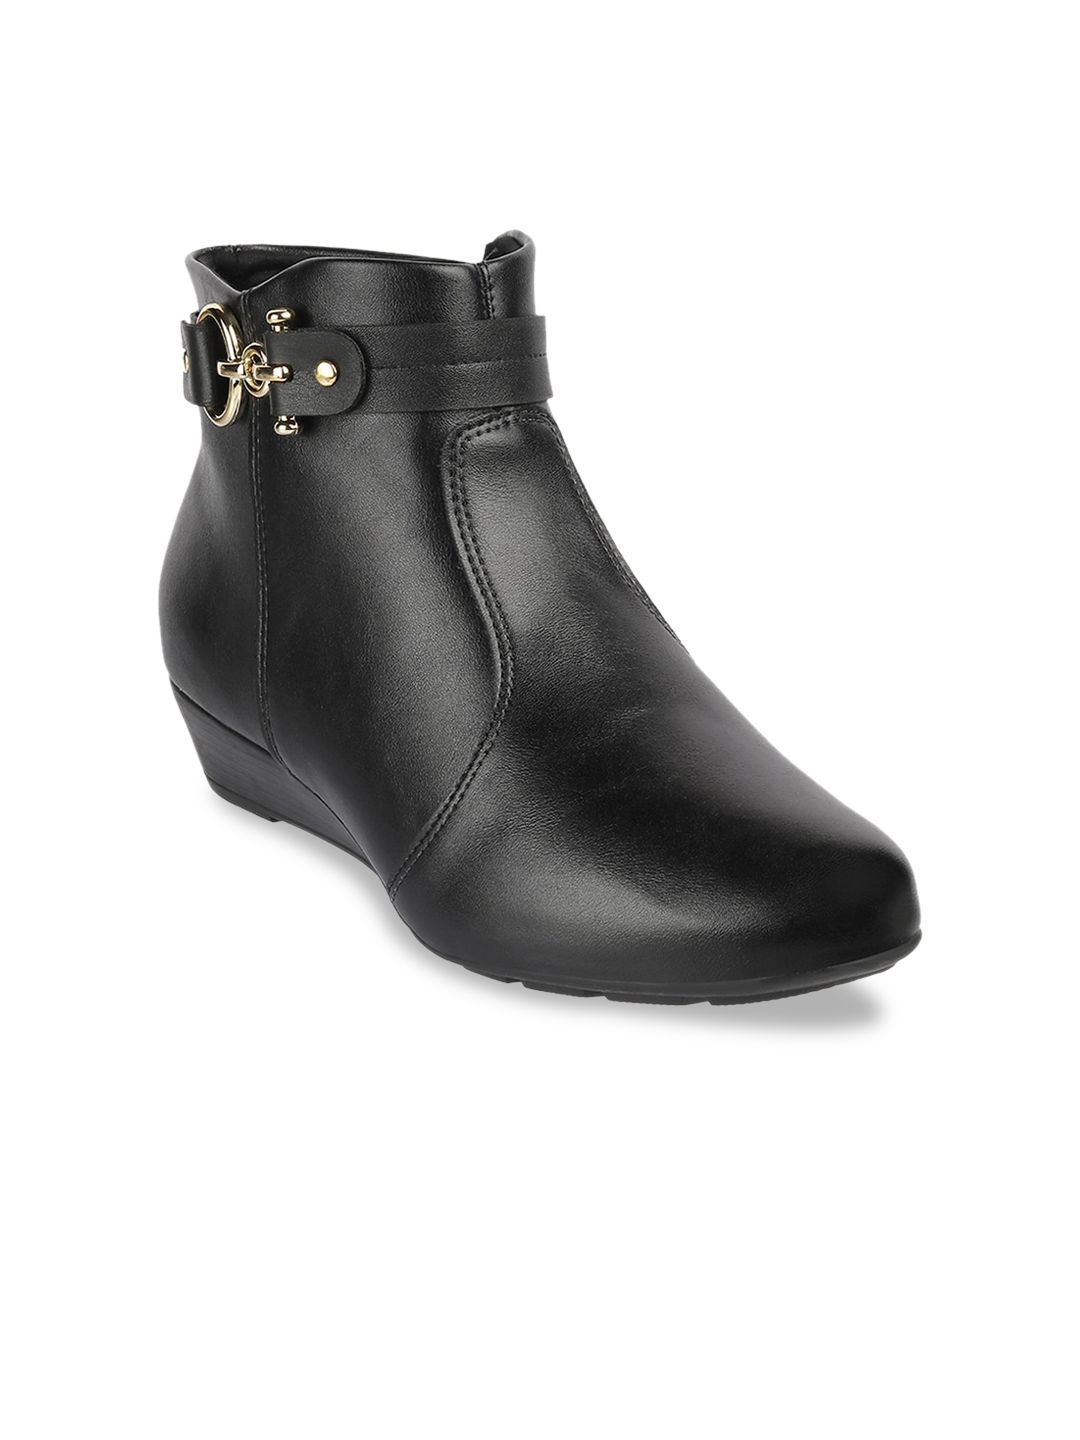 MODARE Black PU Kitten Heeled Boots with Buckles Price in India